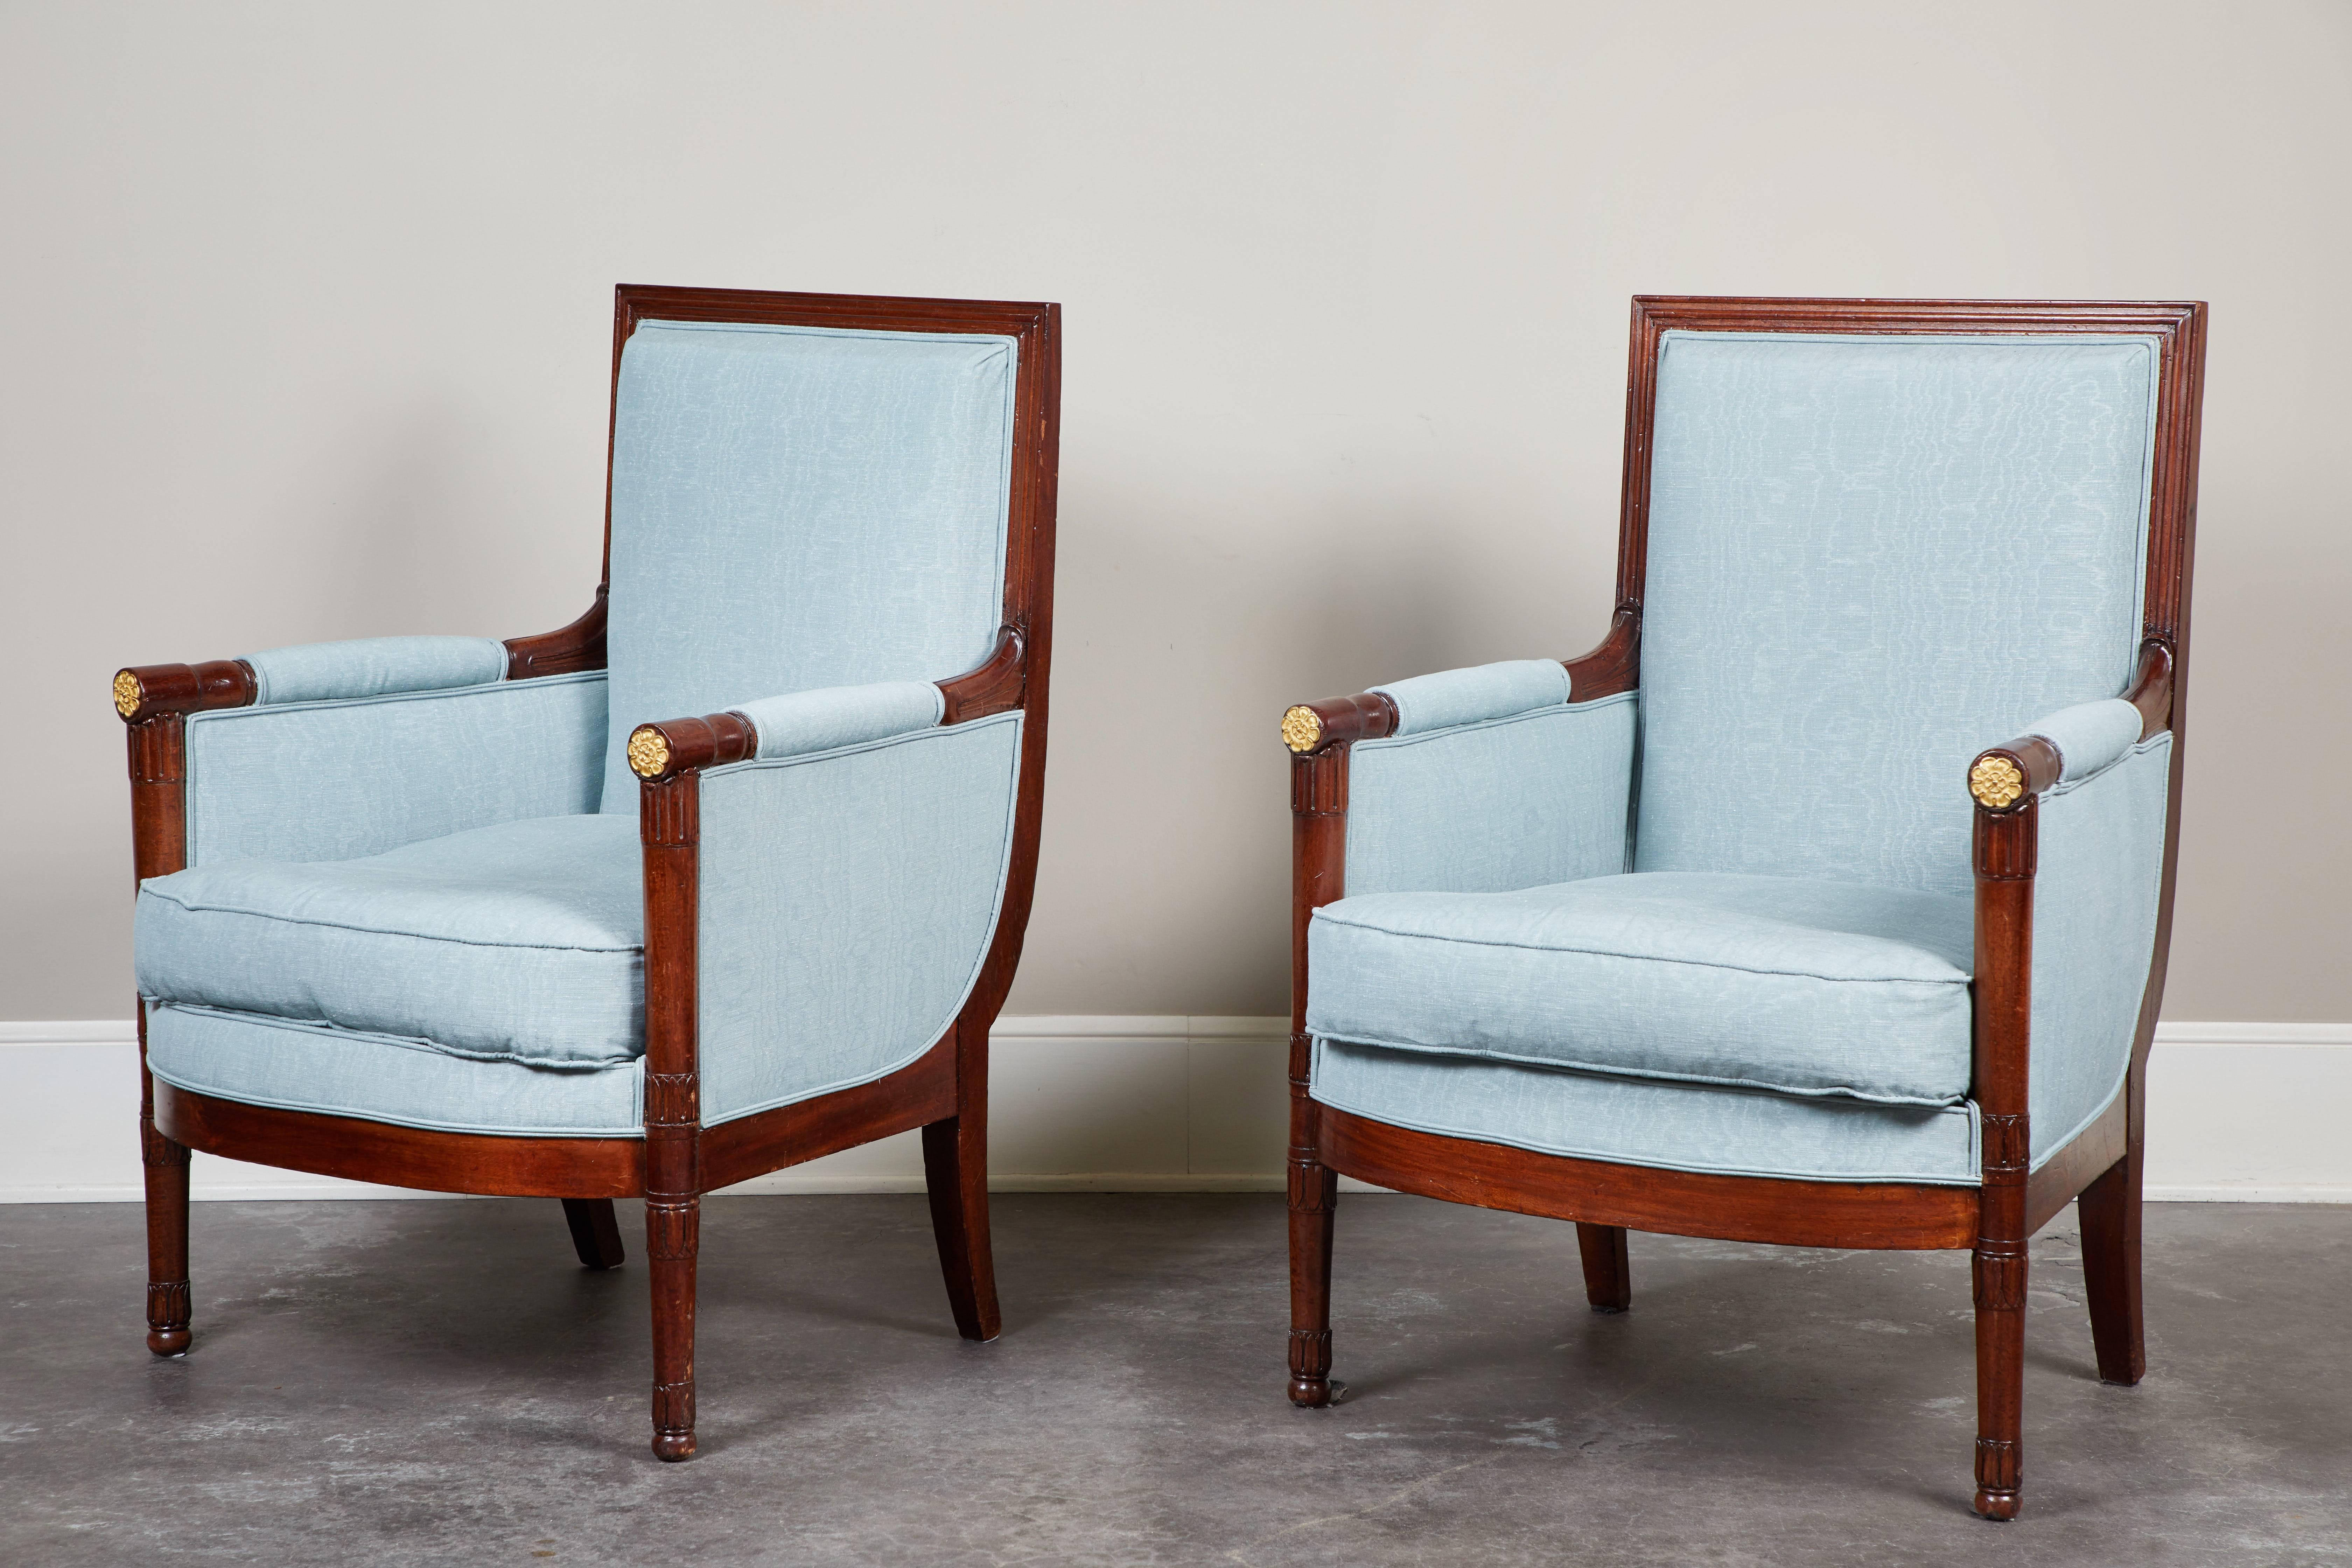 A handsome pair of French Empire mahogany bergeres, circa 1810. Turned legs with foliage carving details and brass trim details.